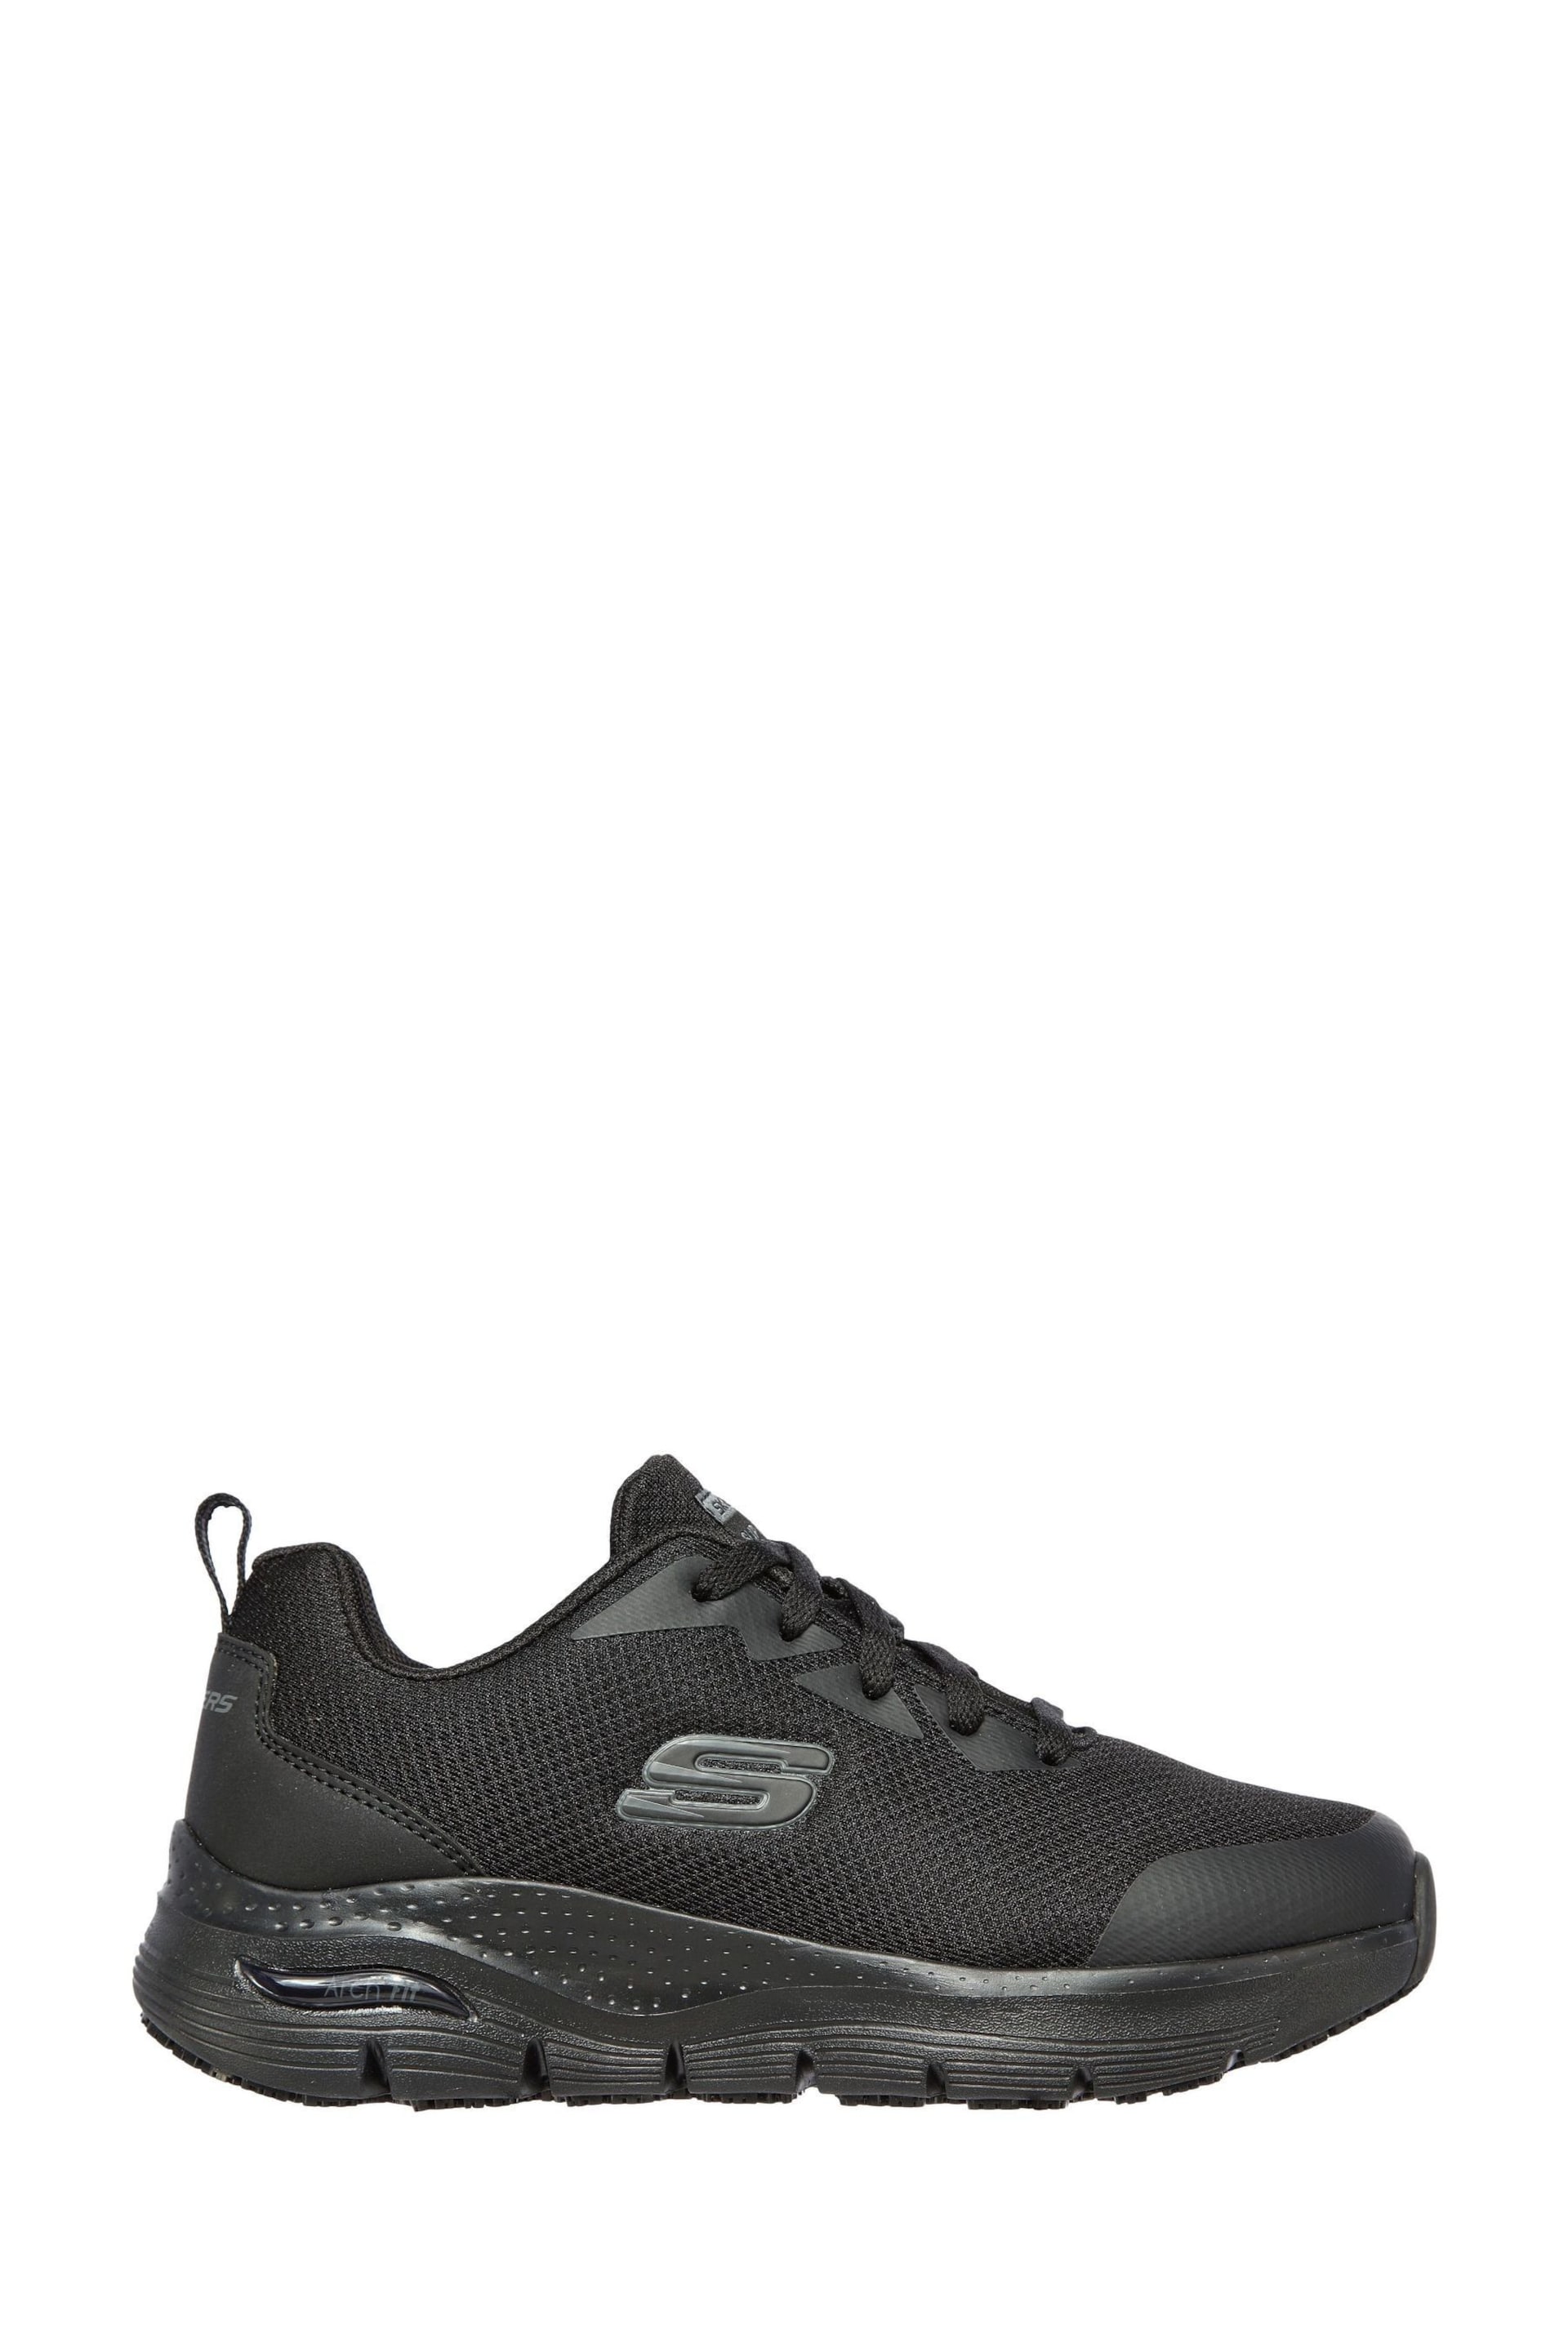 Skechers Black Work Arch Fit Slip Resistant Womens Trainers - Image 1 of 5